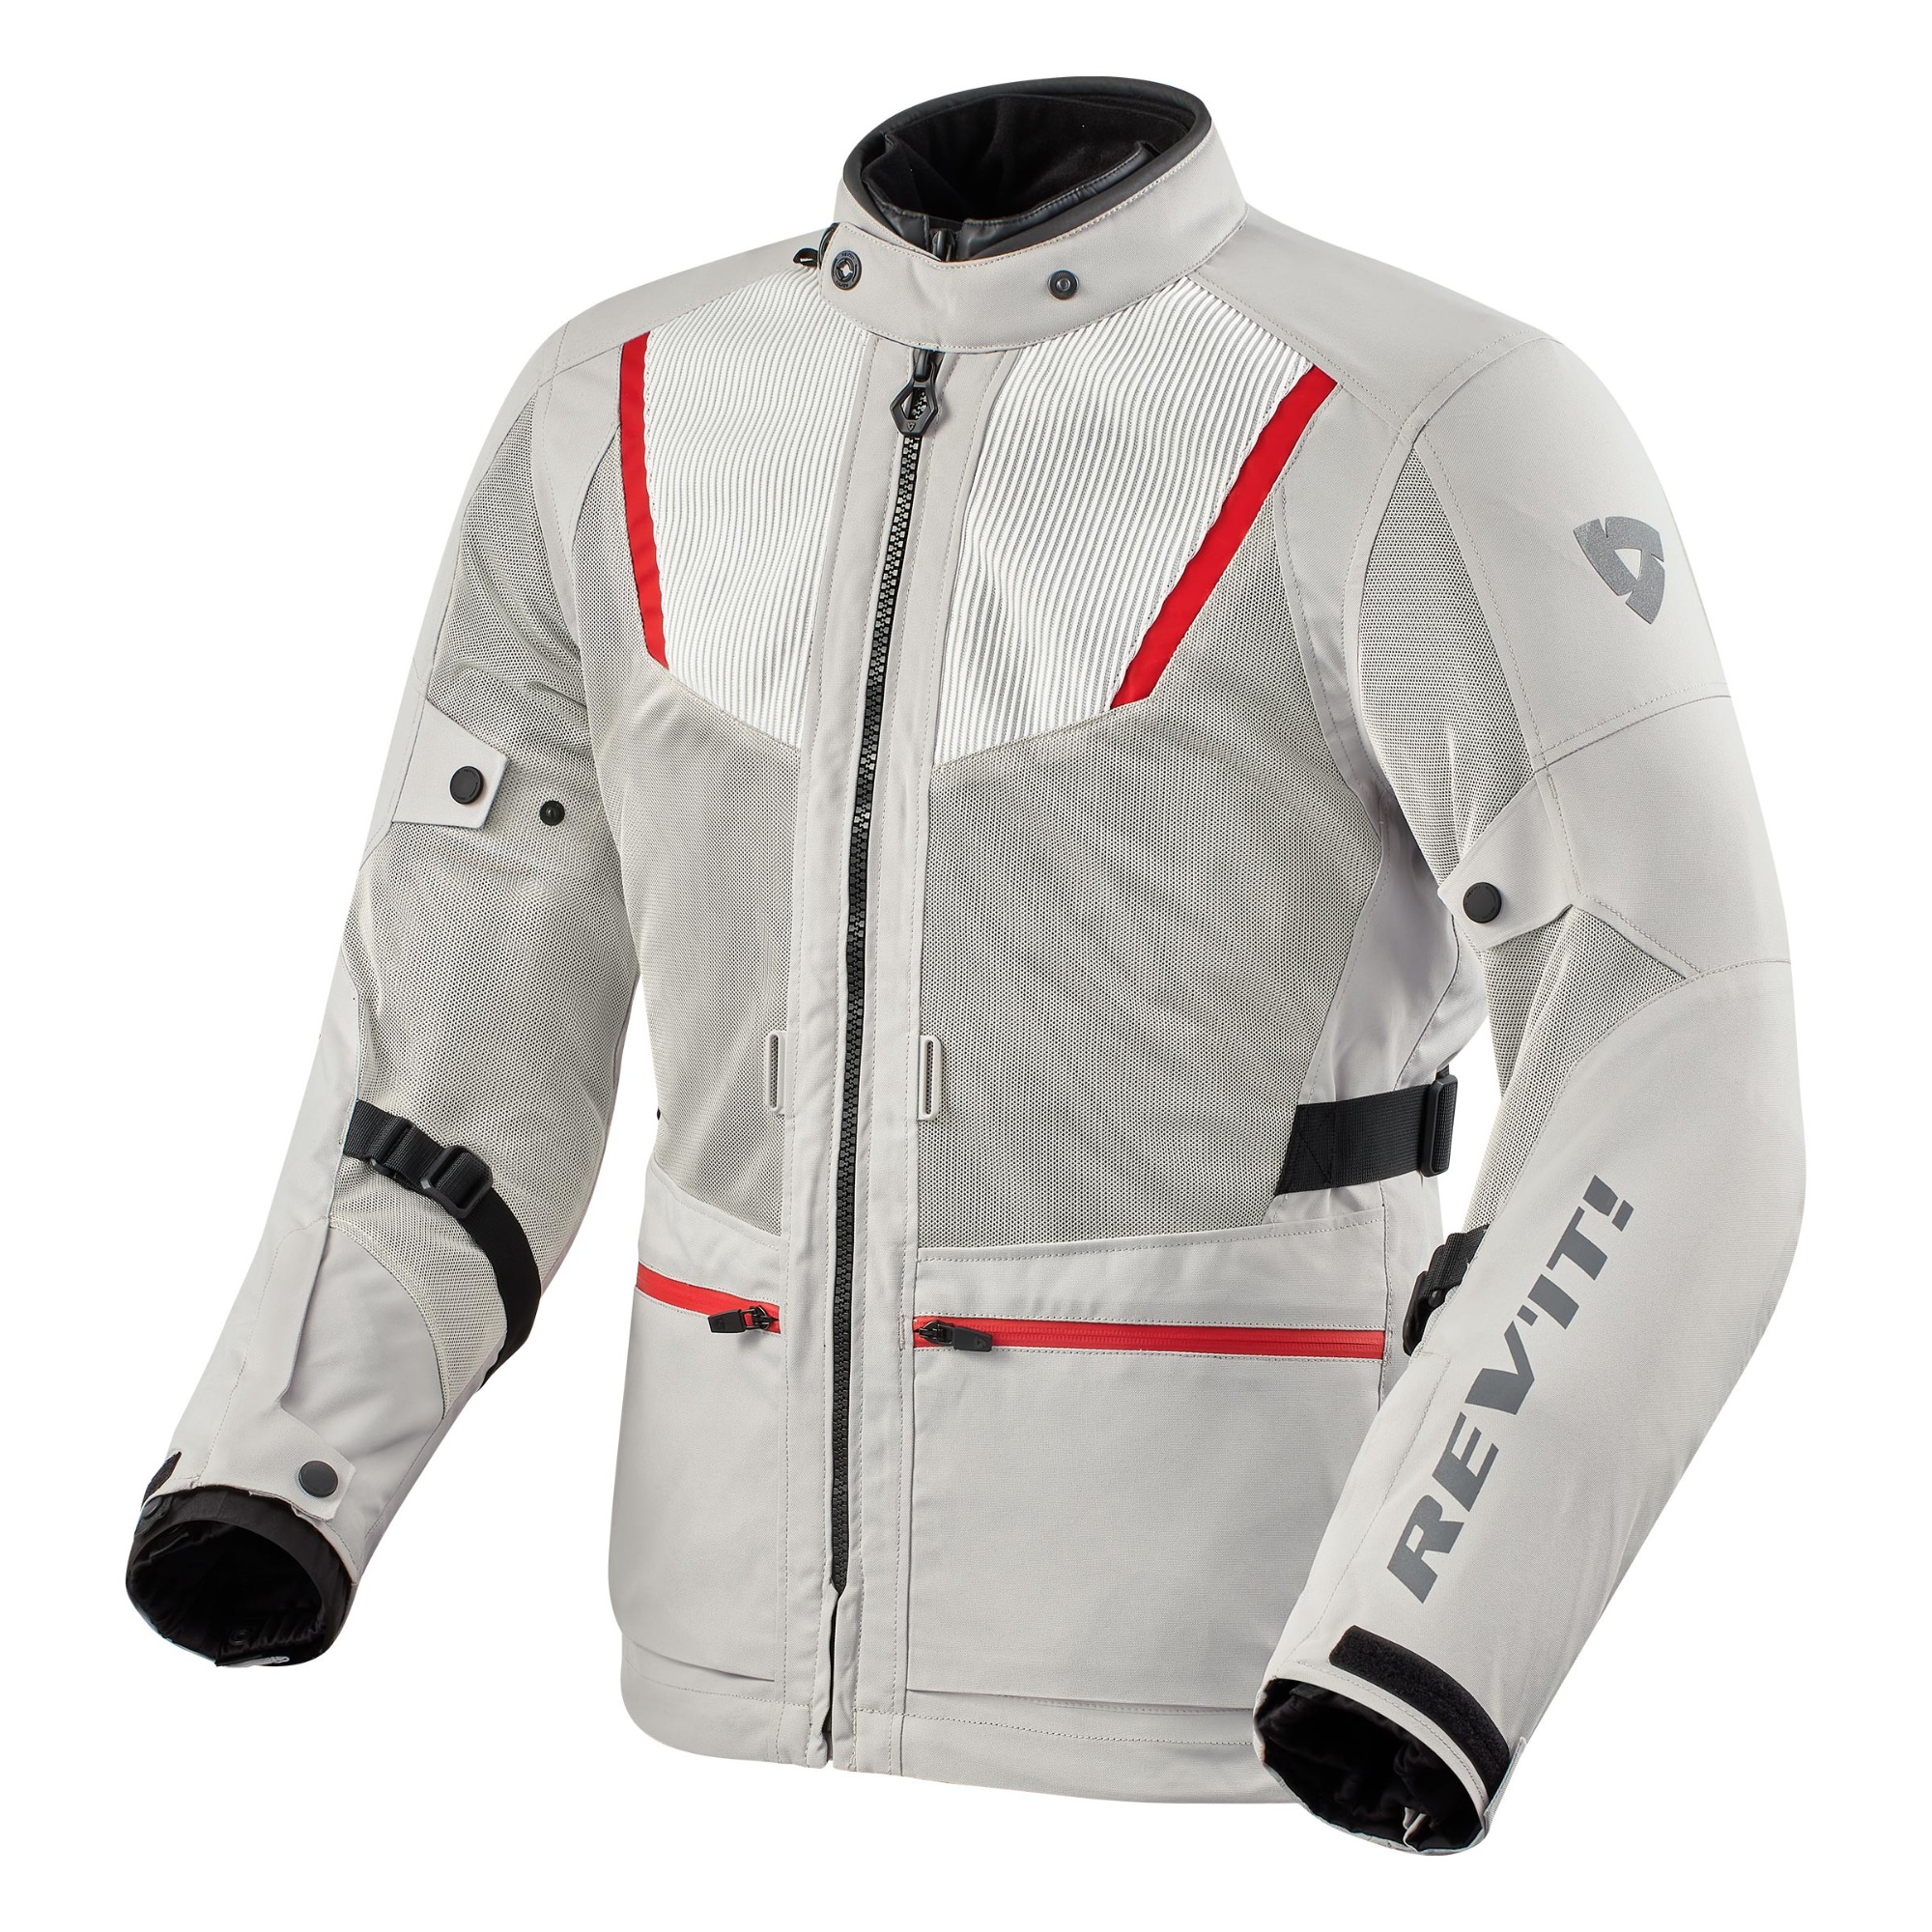 Image of REV'IT! Levante 2 H2O Jacket Silver Size L ID 8700001332620